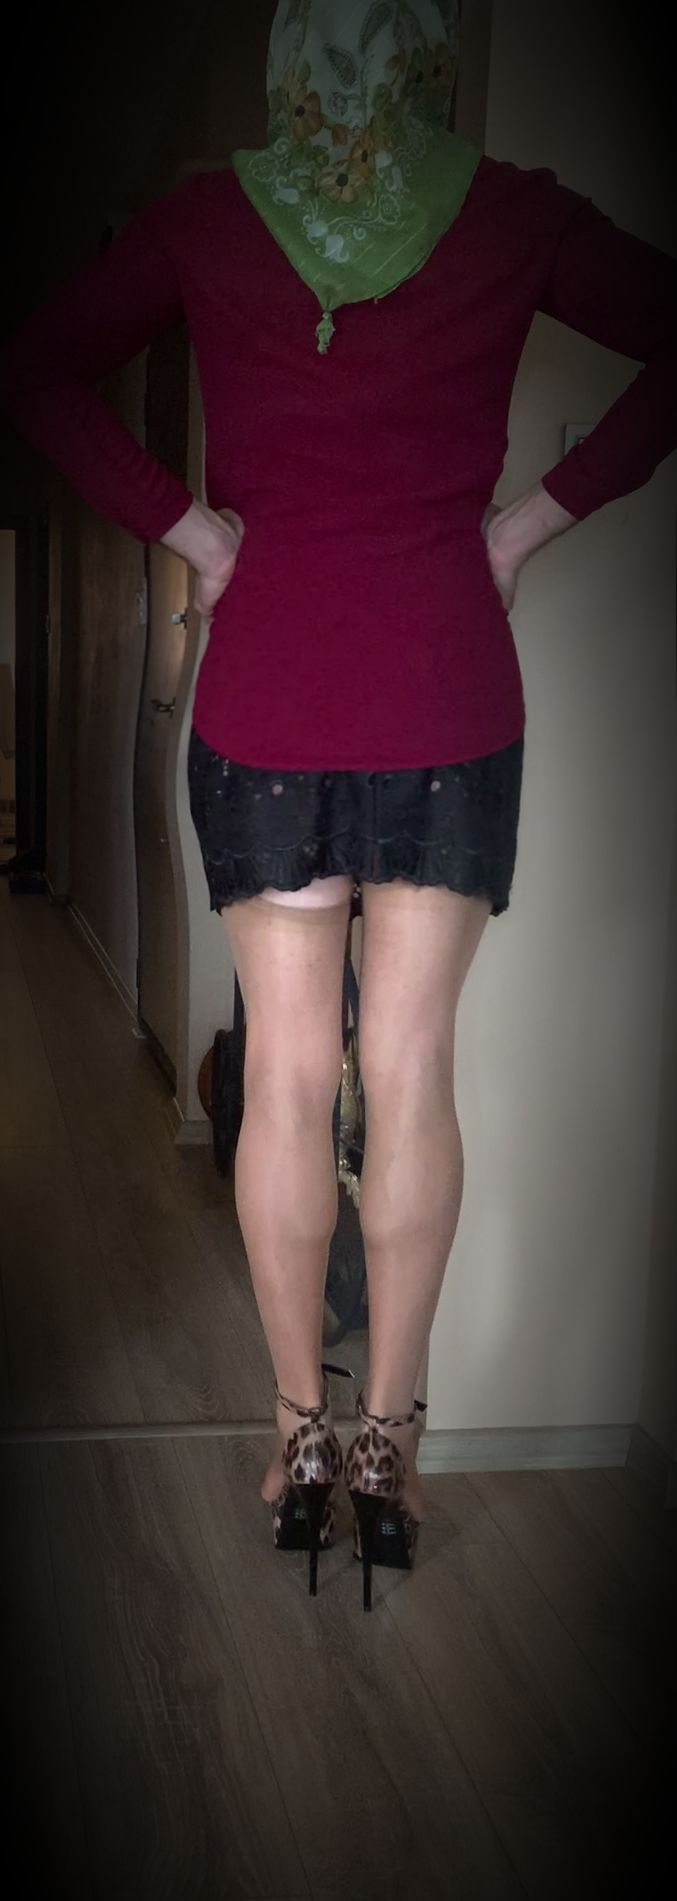 My Mom's Friend and her SMiniskirt #35